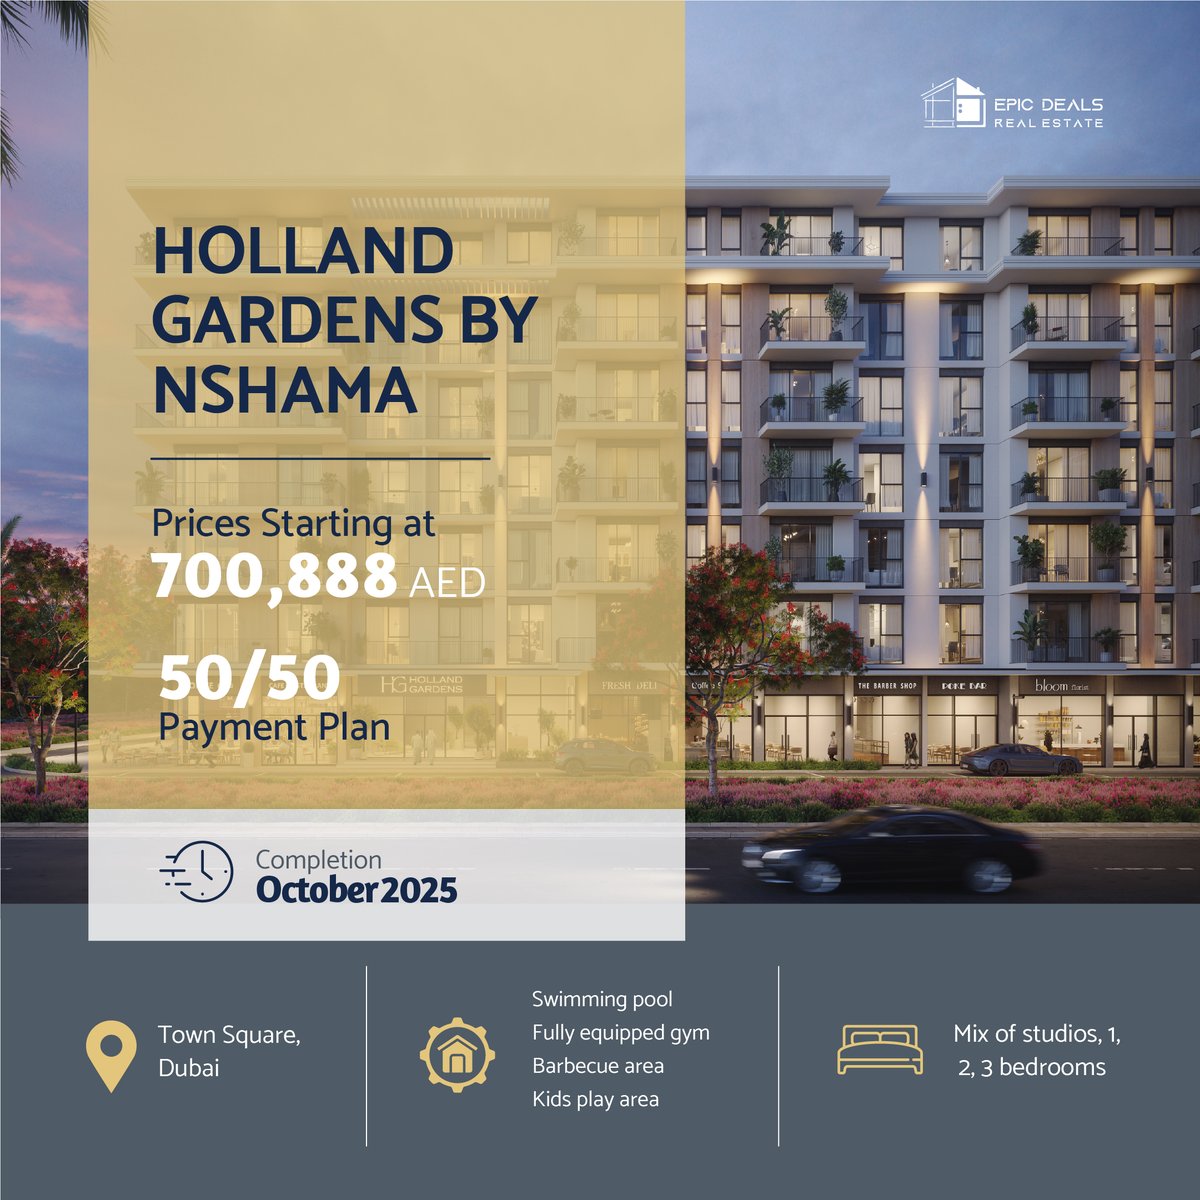 Holland Gardens by Nshama📍Town Square, Dubai

A vibrant community offering elegantly designed homes and amenities for Urban living

#dubai #investmentproperty #realestate #investment #propertyinvestment #househunting  #forsale #investments #luxuryrealestate #townsquare #nshama